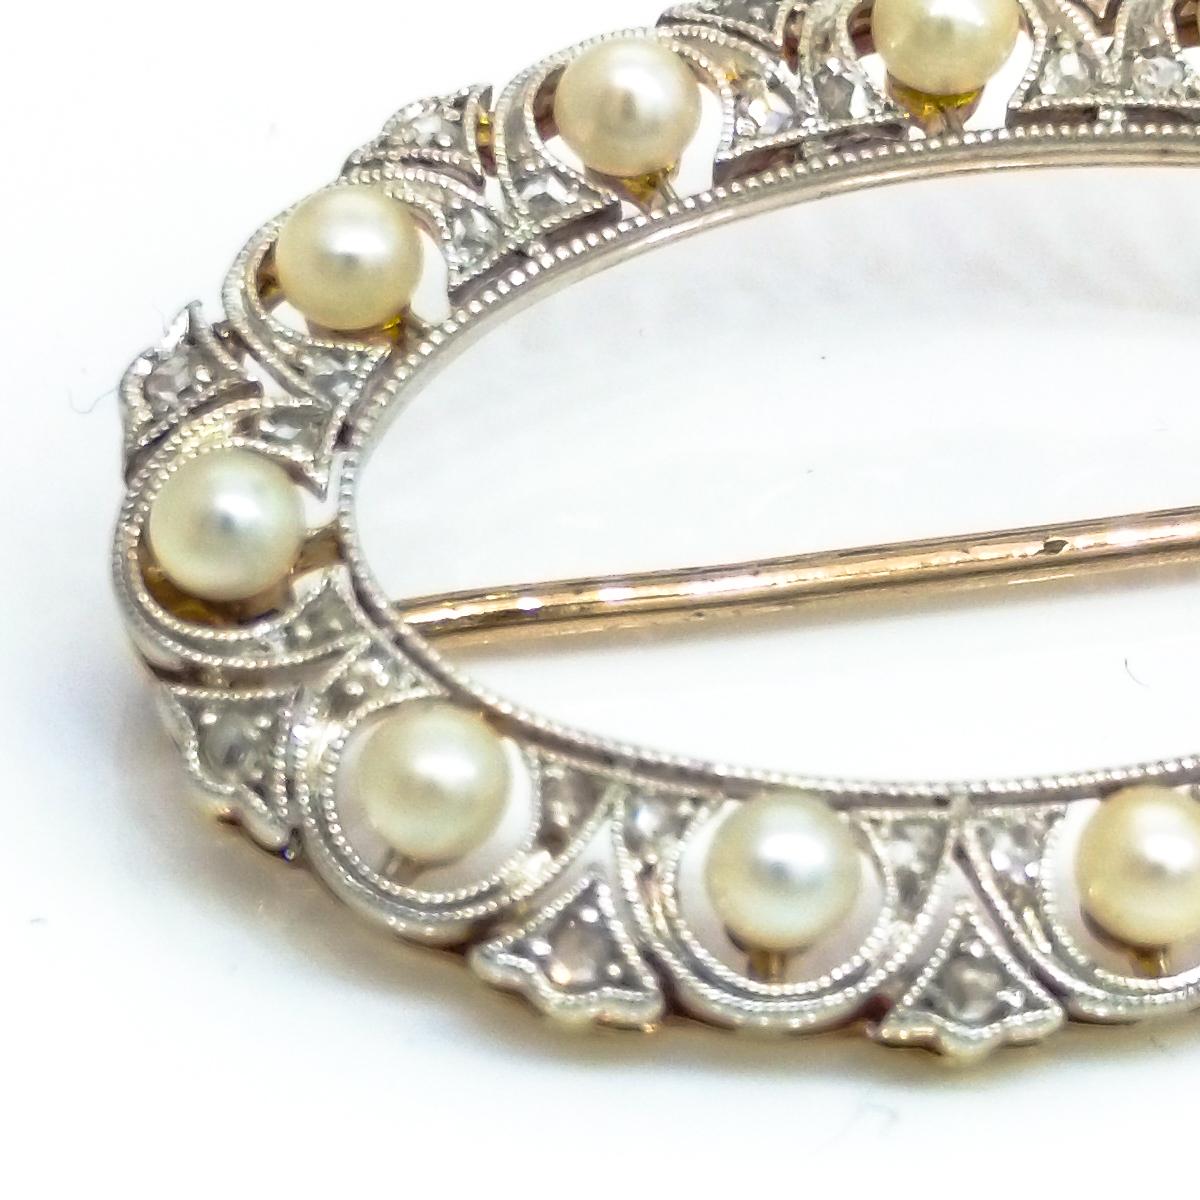 Hand made oval brooch measuring 34 mm x 22 mm
Set in Platinum and 18 carat Yellow Gold
With 12 pearls 2.7 mm in diameter and encrusted with 36 Rose-cut diamonds
Art Nouveau, circa 1920-s
Total weight of the brooch is 4.88 grams